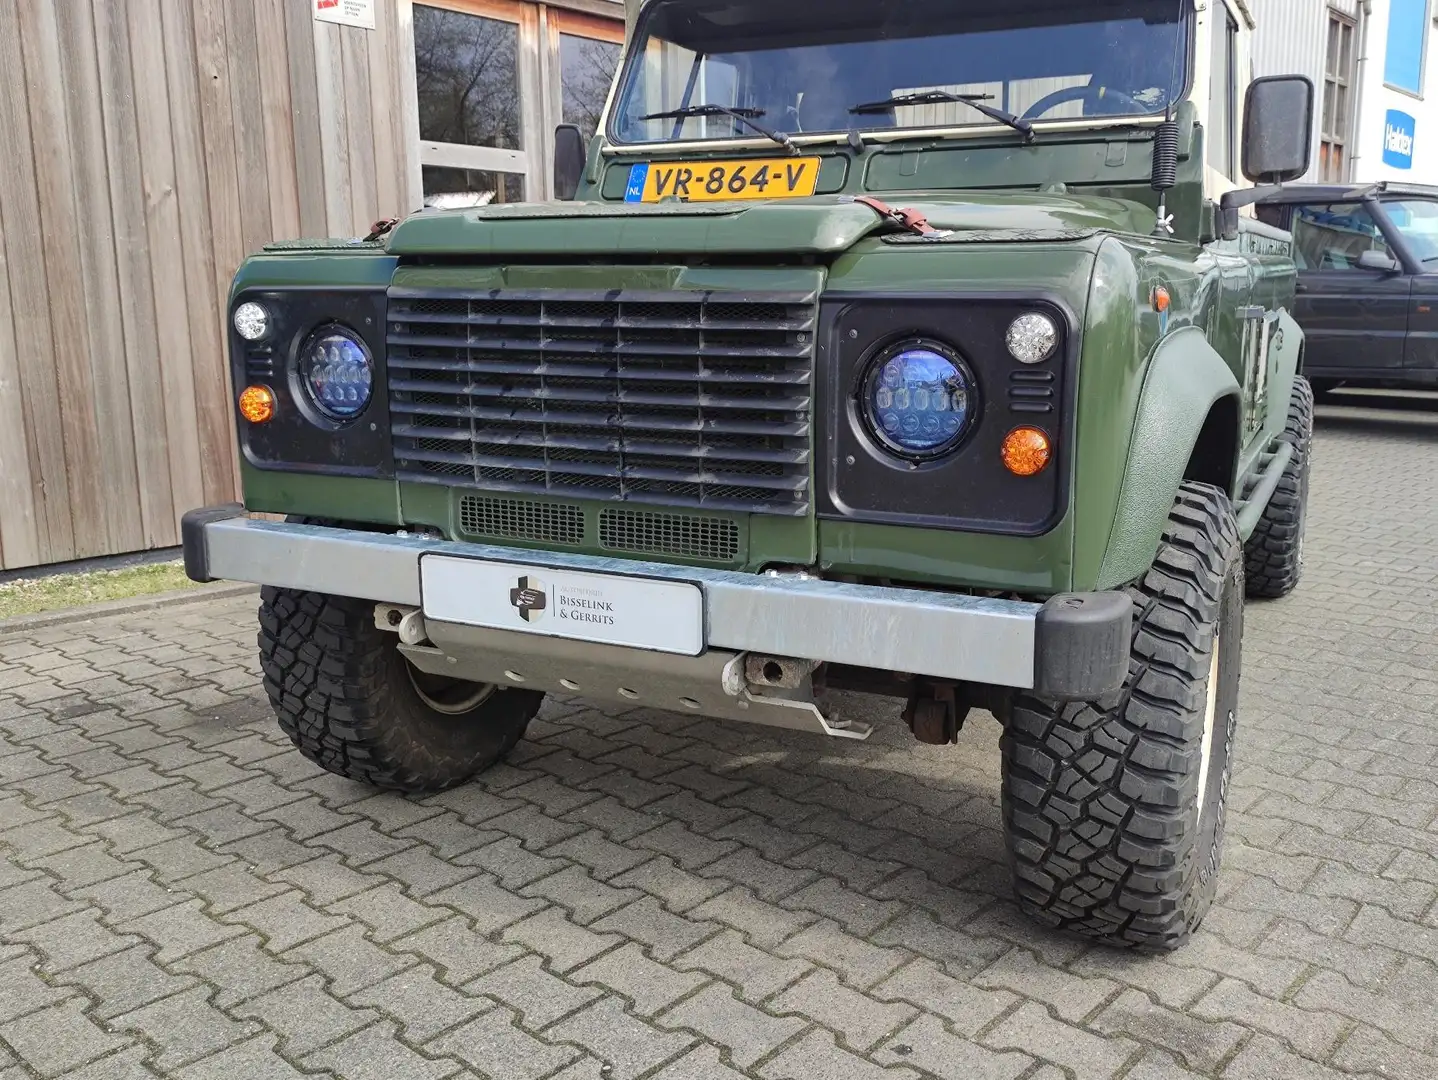 Land Rover Defender 110 2.5 Td5 Pick-Up ext. Cab galv. chassis Grün - 2